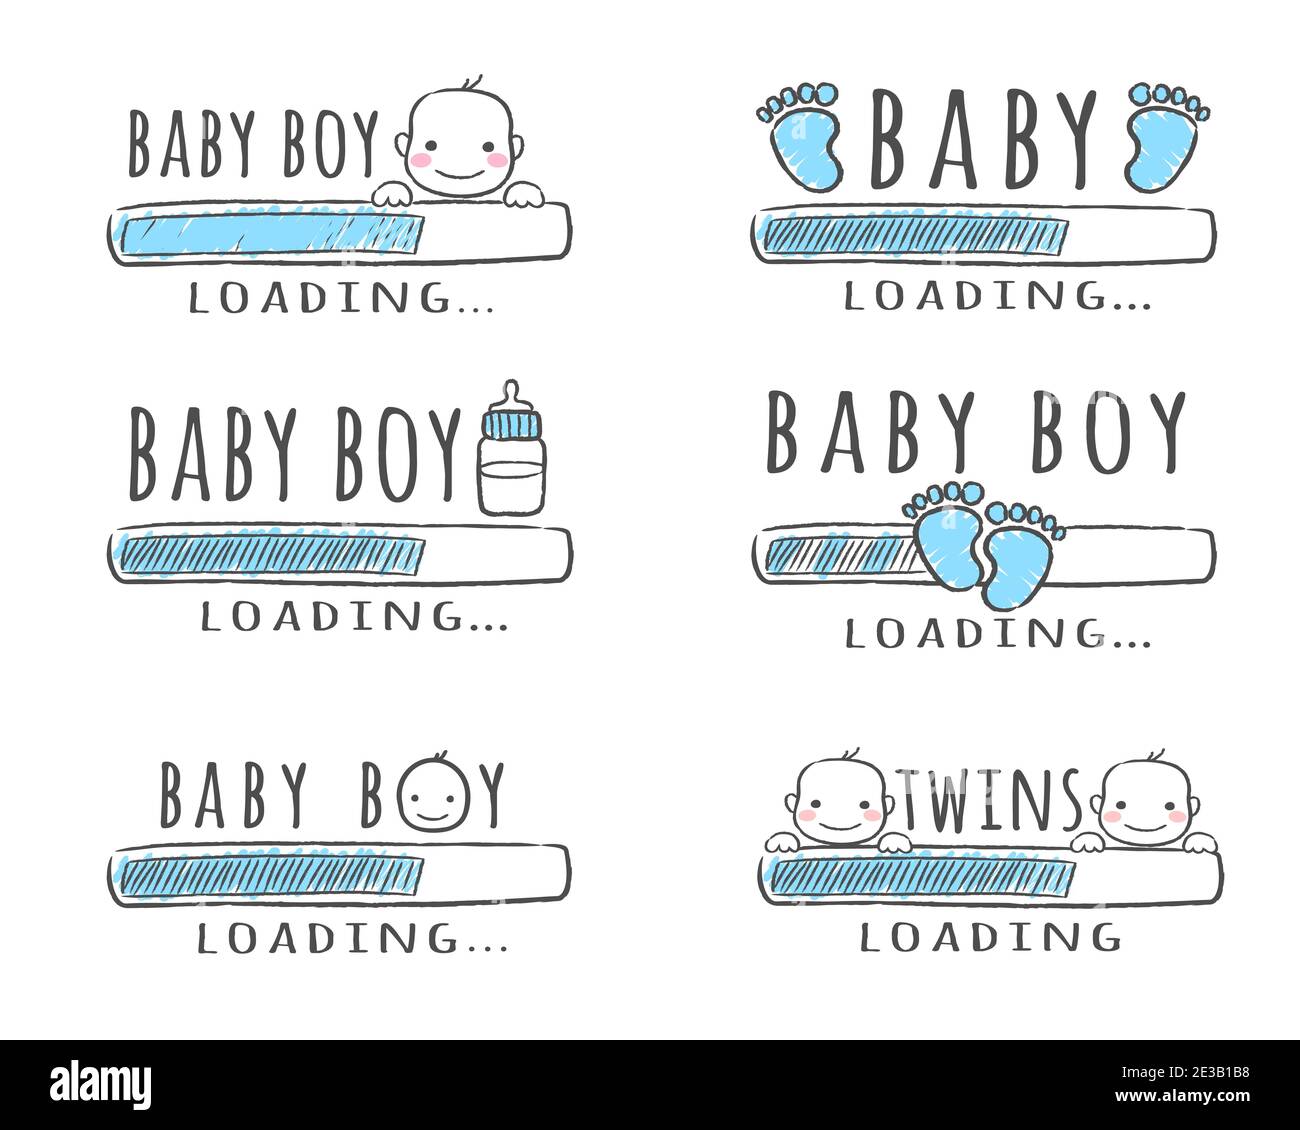 Baby Loading Cut Out Stock Images Pictures Alamy